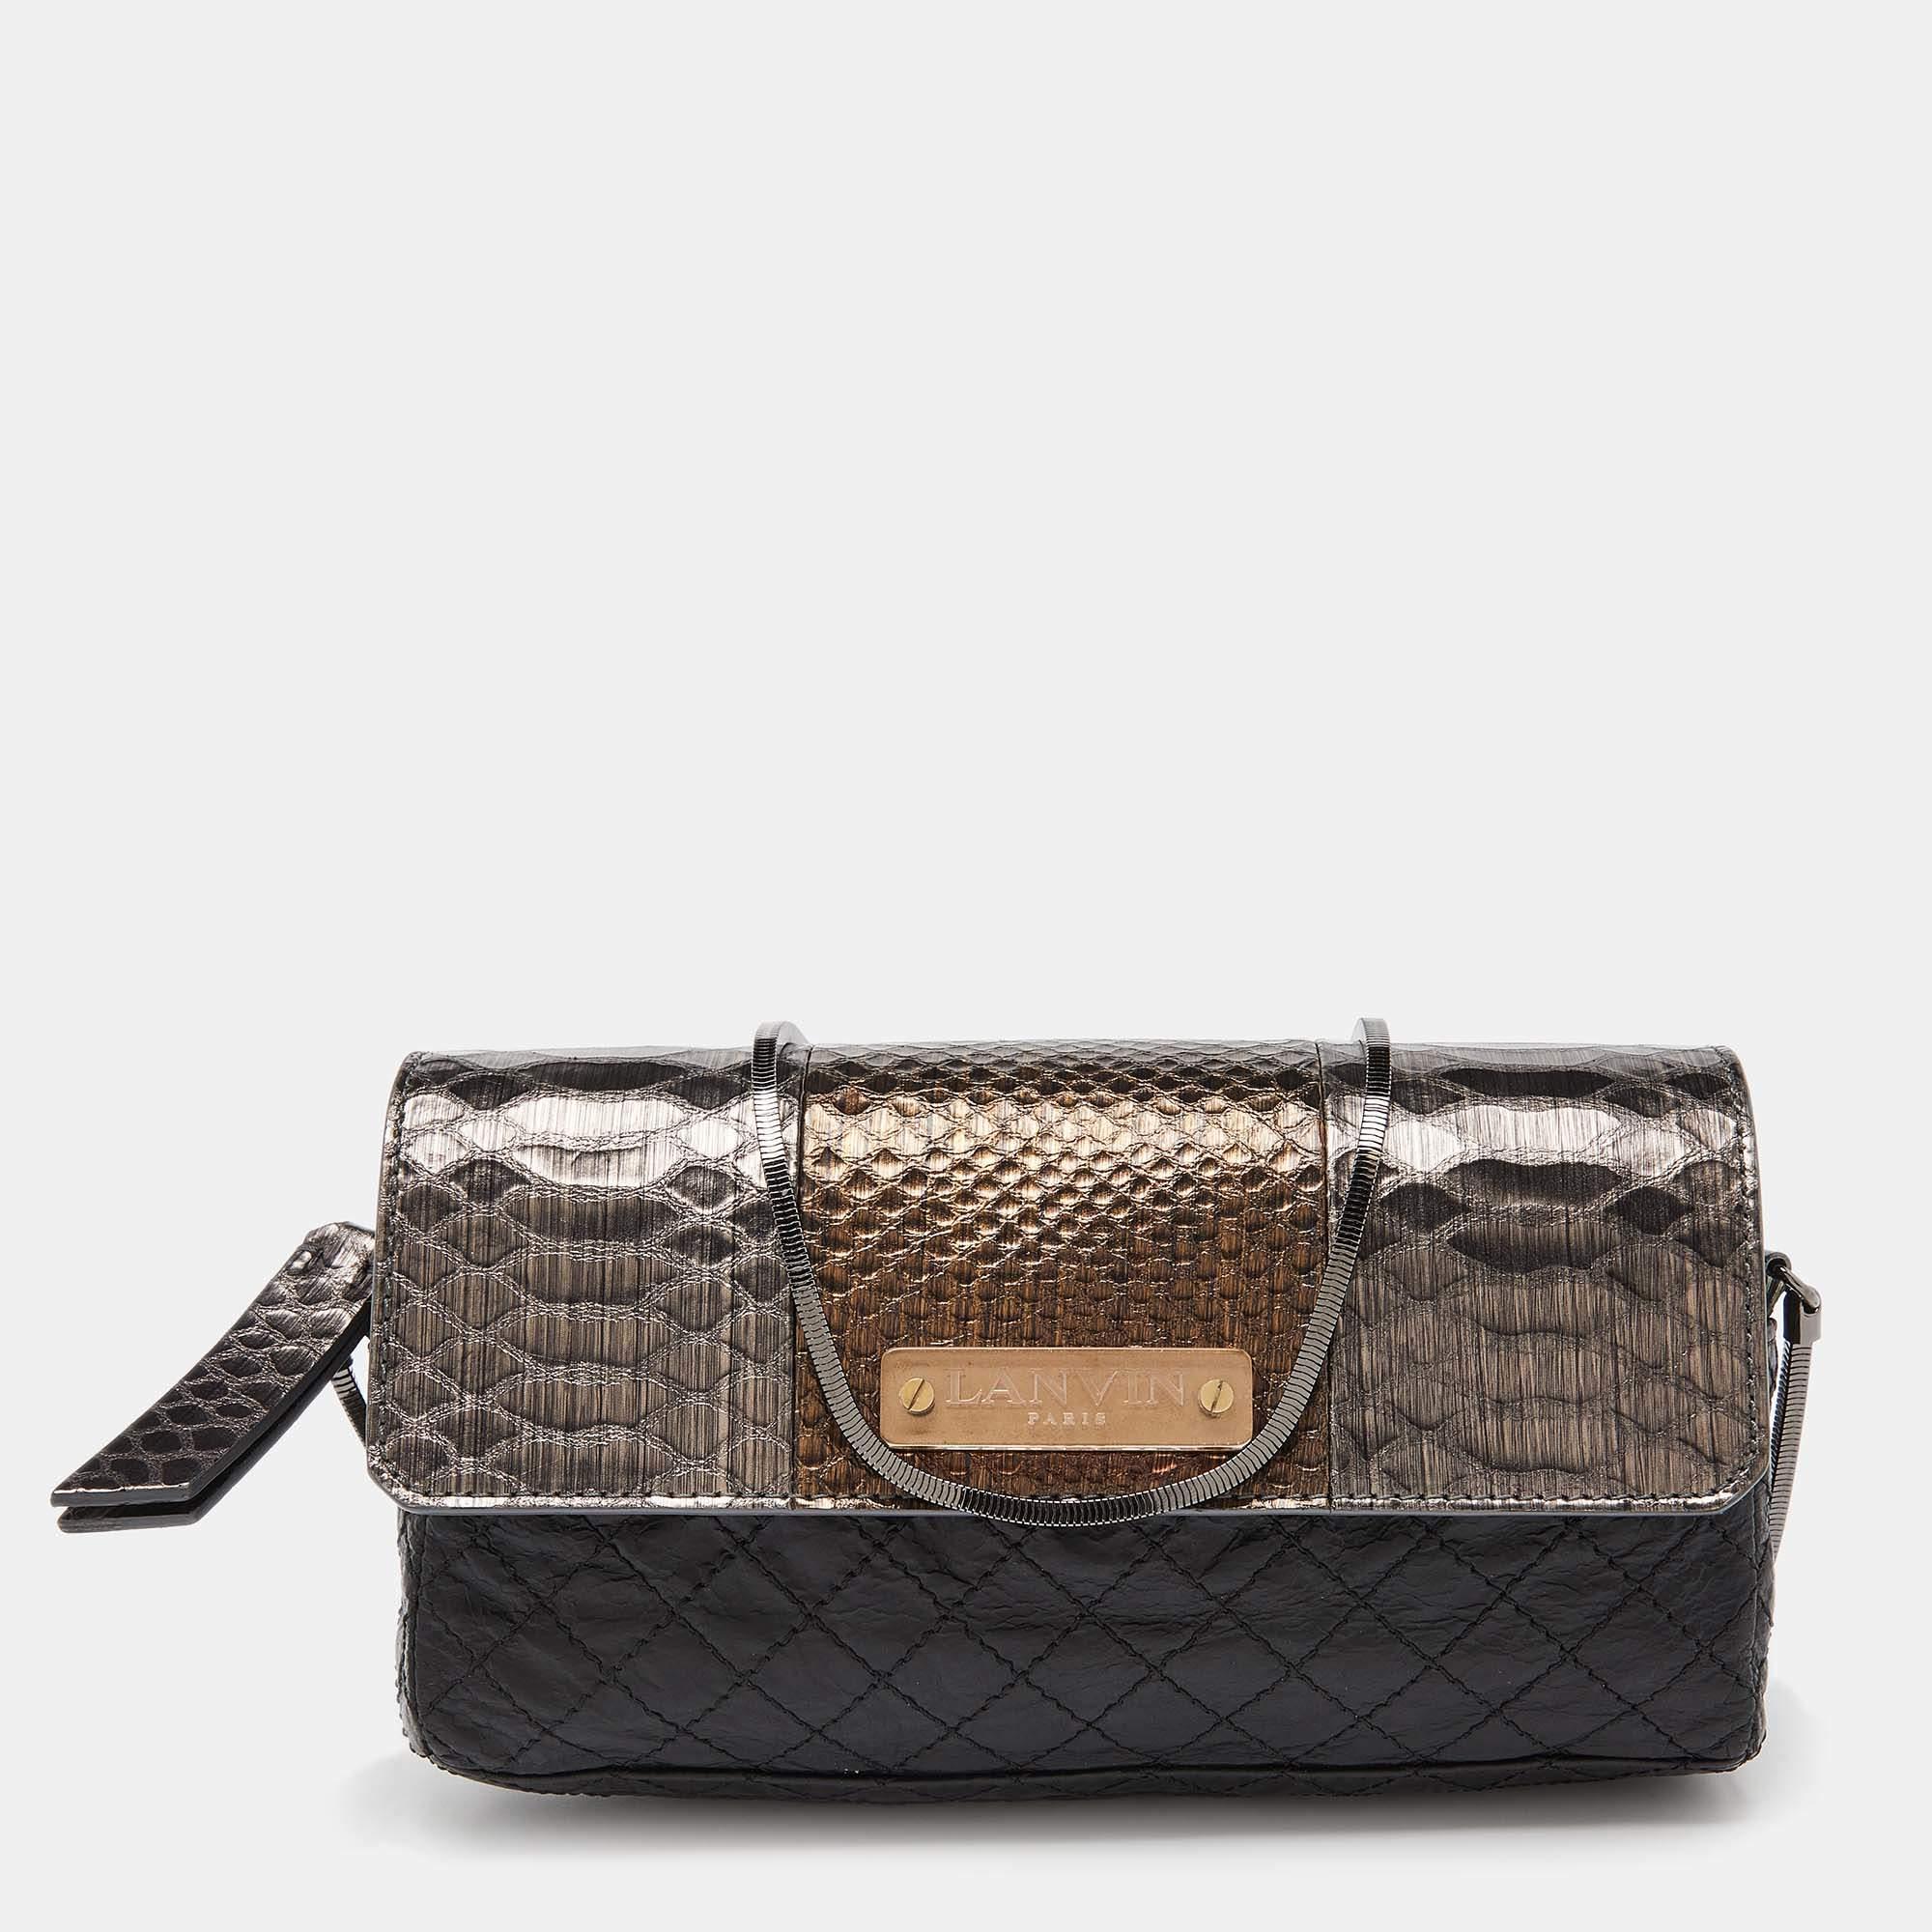 Noir Lanvin Black/Gold Quilted Leather and Python Embossed Leather Flap Crossbody Bag en vente